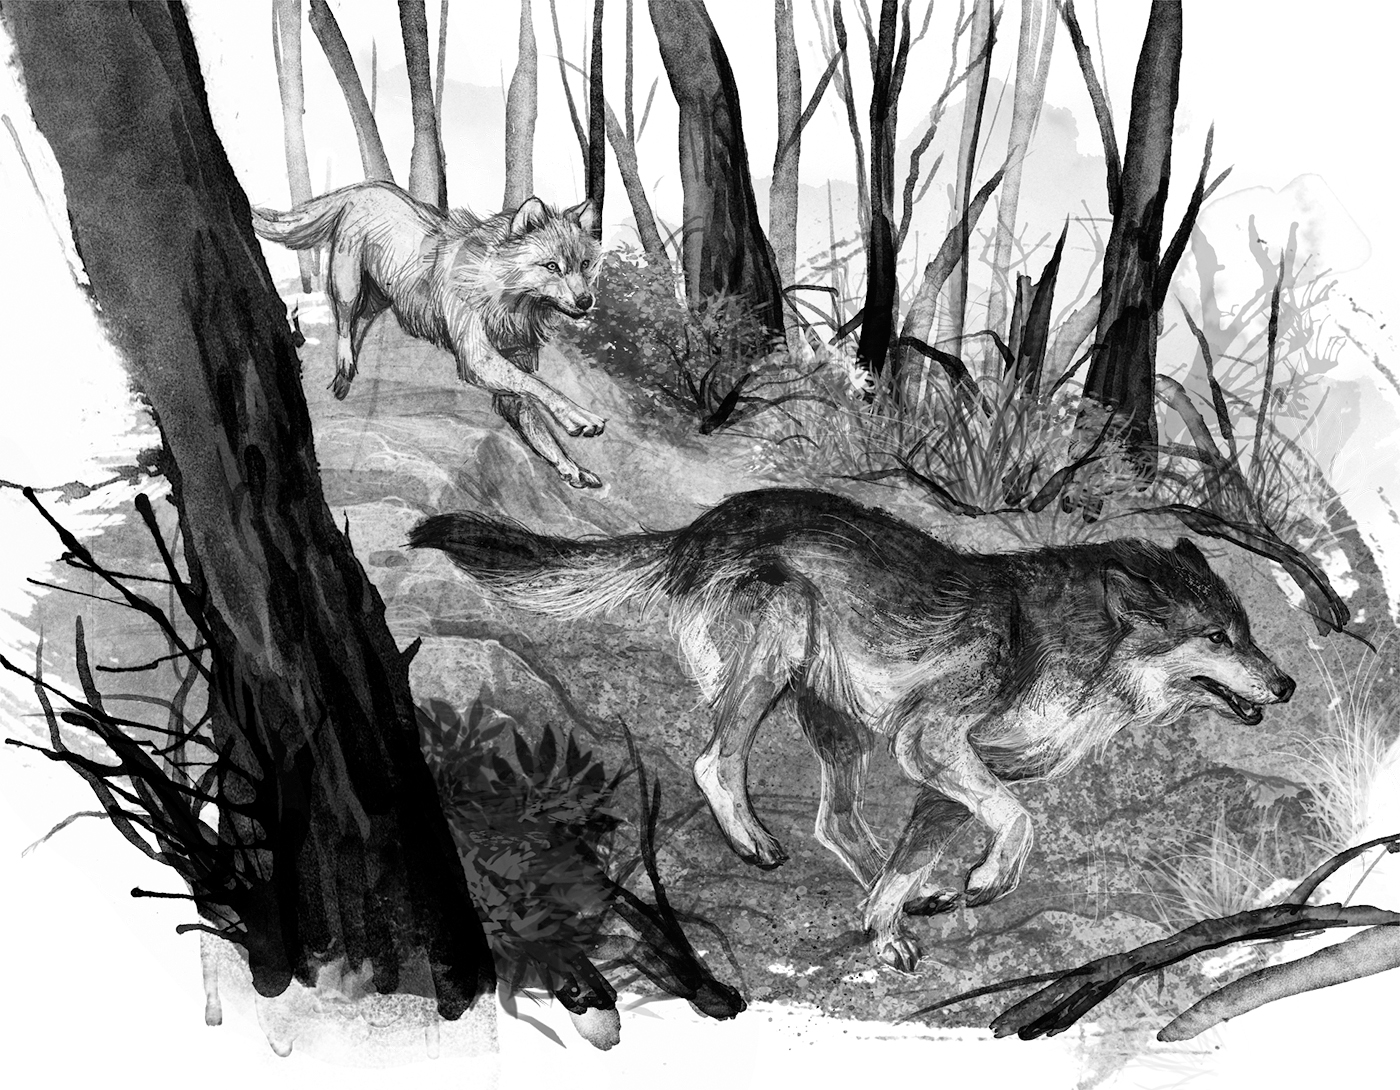 rosanne parry a wolf called wander